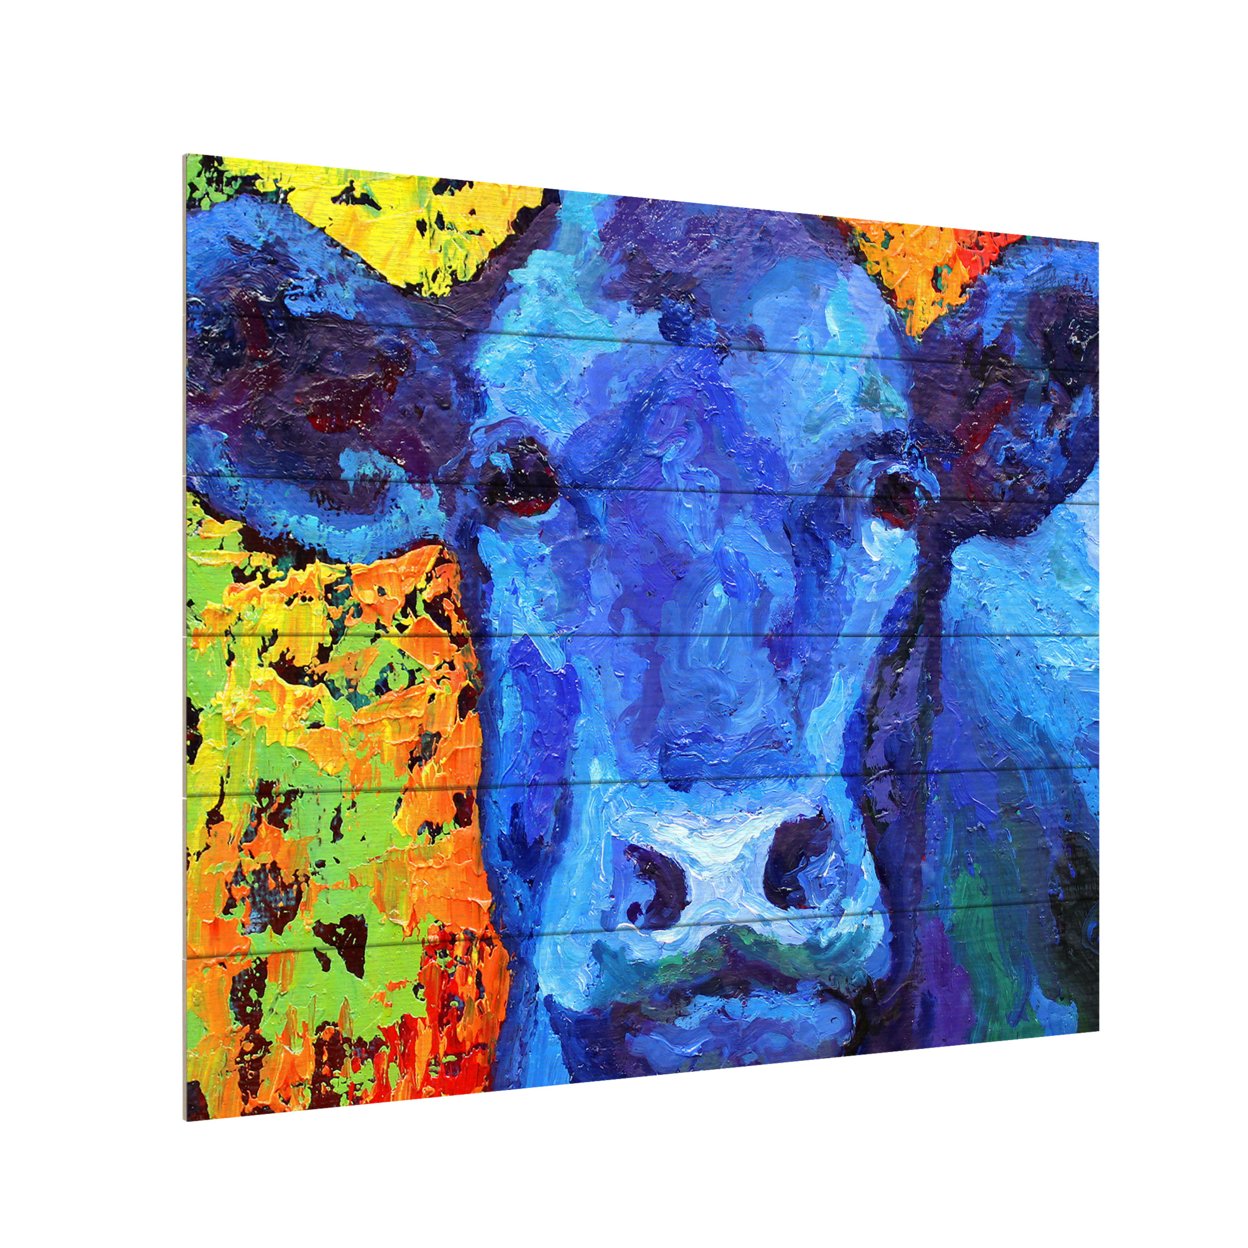 Wooden Slat Art 18 X 22 Inches Titled Blue Cow Ready To Hang Home Decor Picture